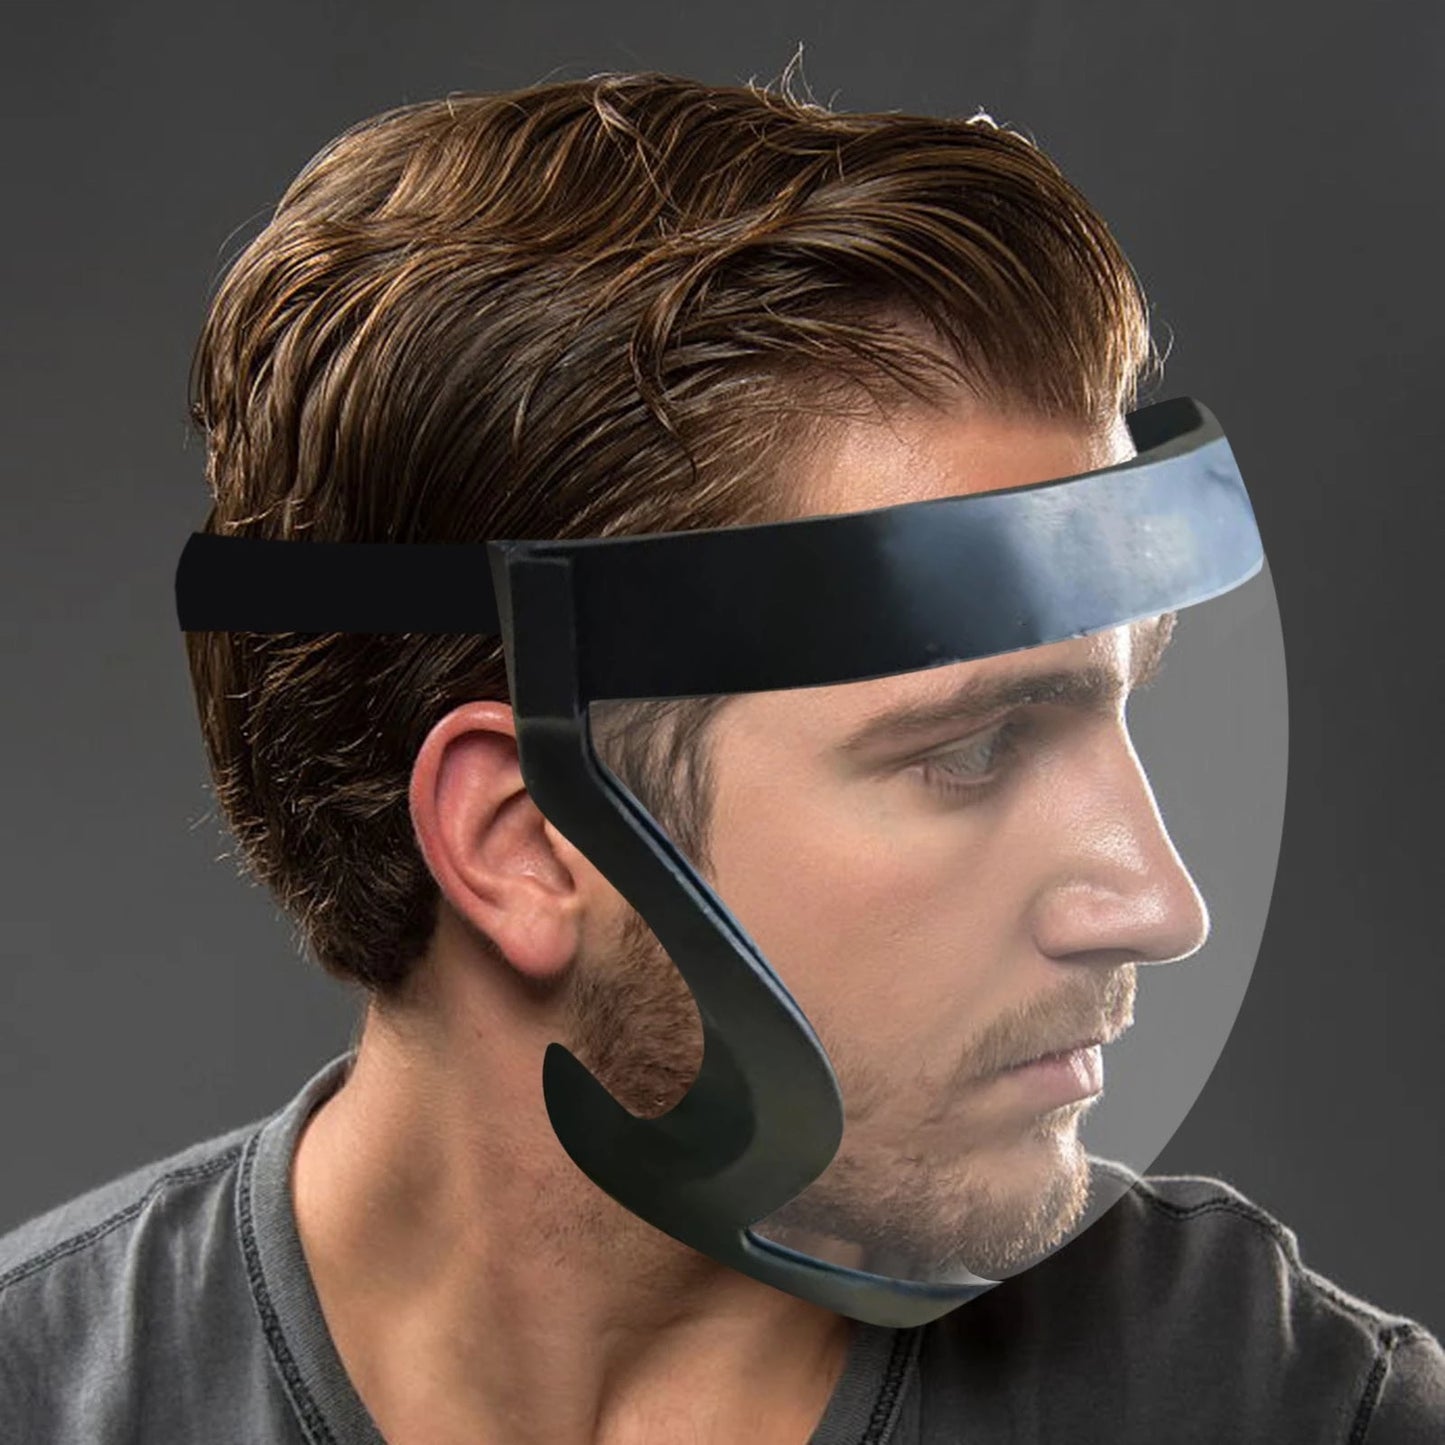 Full face mask transparent sports mask with edging